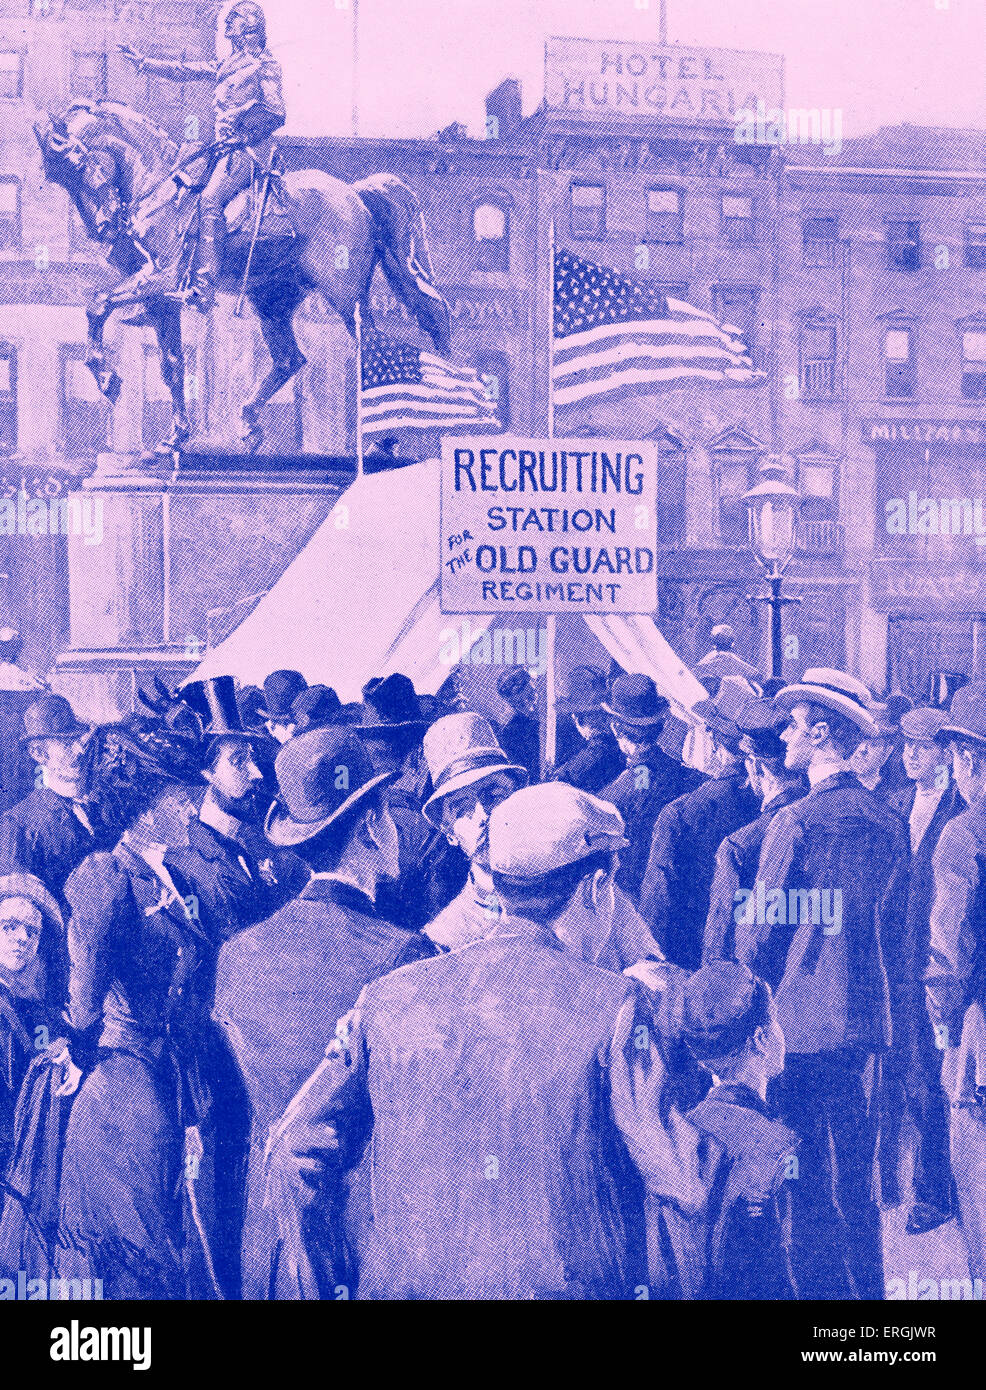 Recruiting for the Spanish-American War in Union Square, New York. Stock Photo